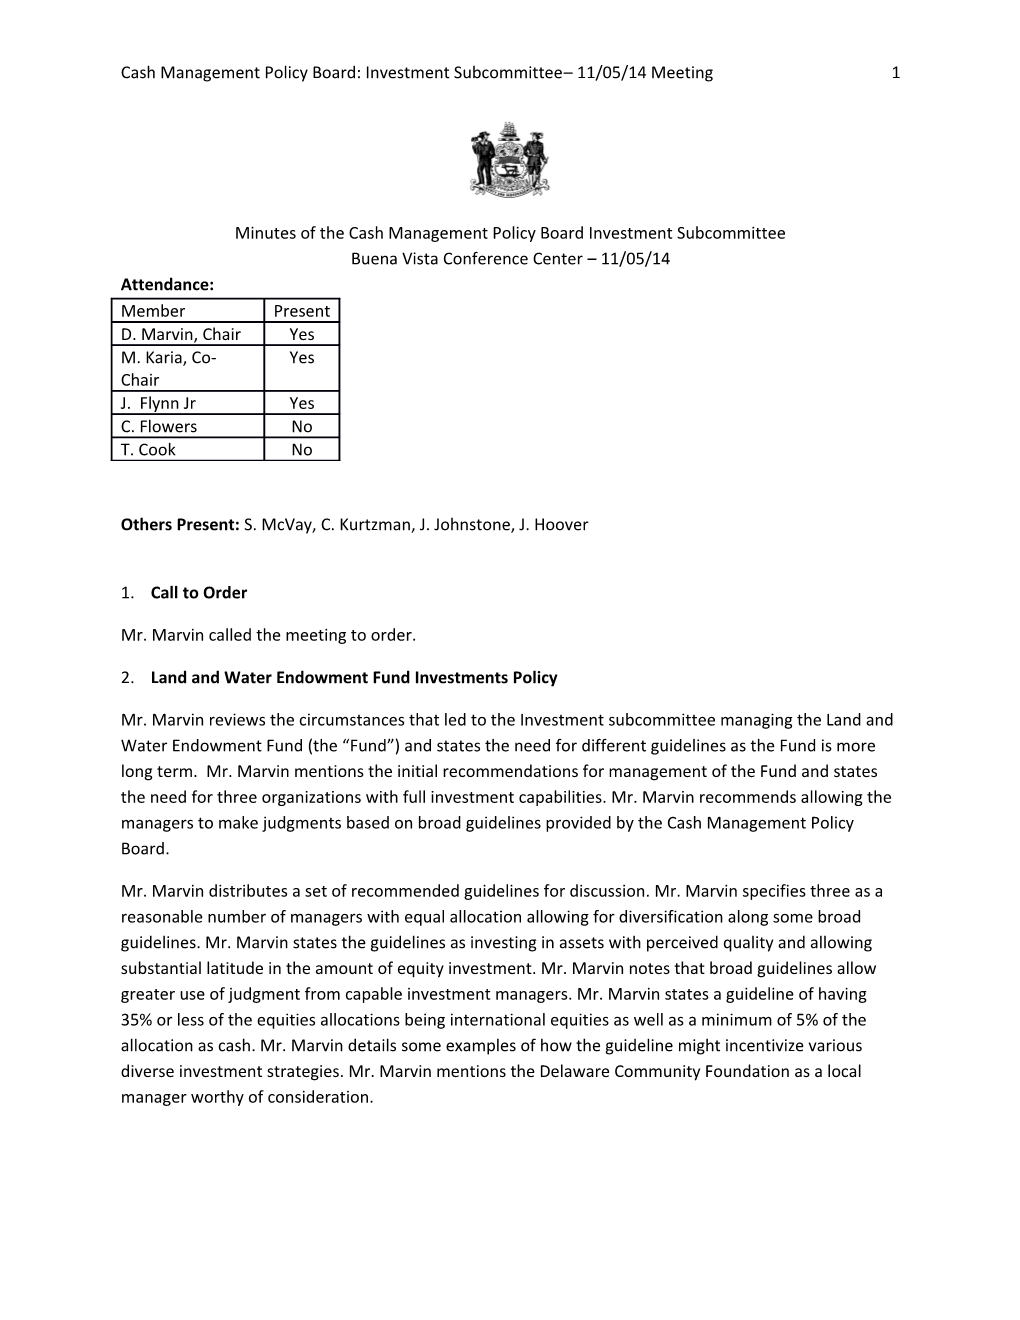 Cash Management Policy Board: Investment Subcommittee 11/05/14 Meeting 1